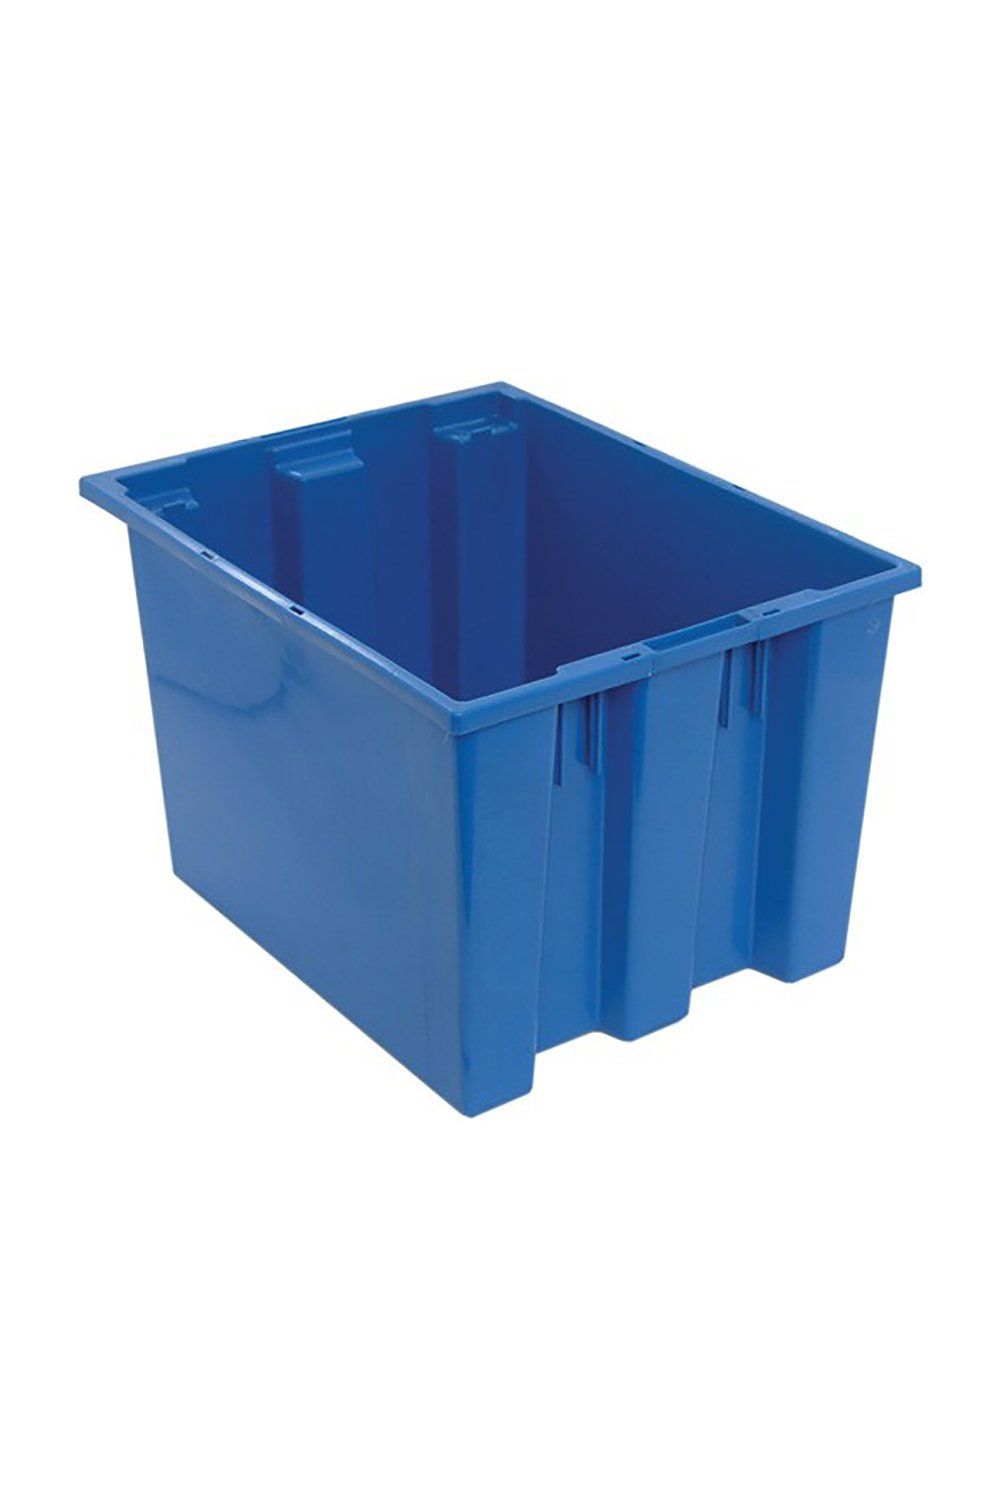 Stack and Nest Tote Bins & Containers Acart 19-1/2"L x 15-1/2"W x 13"H Blue 